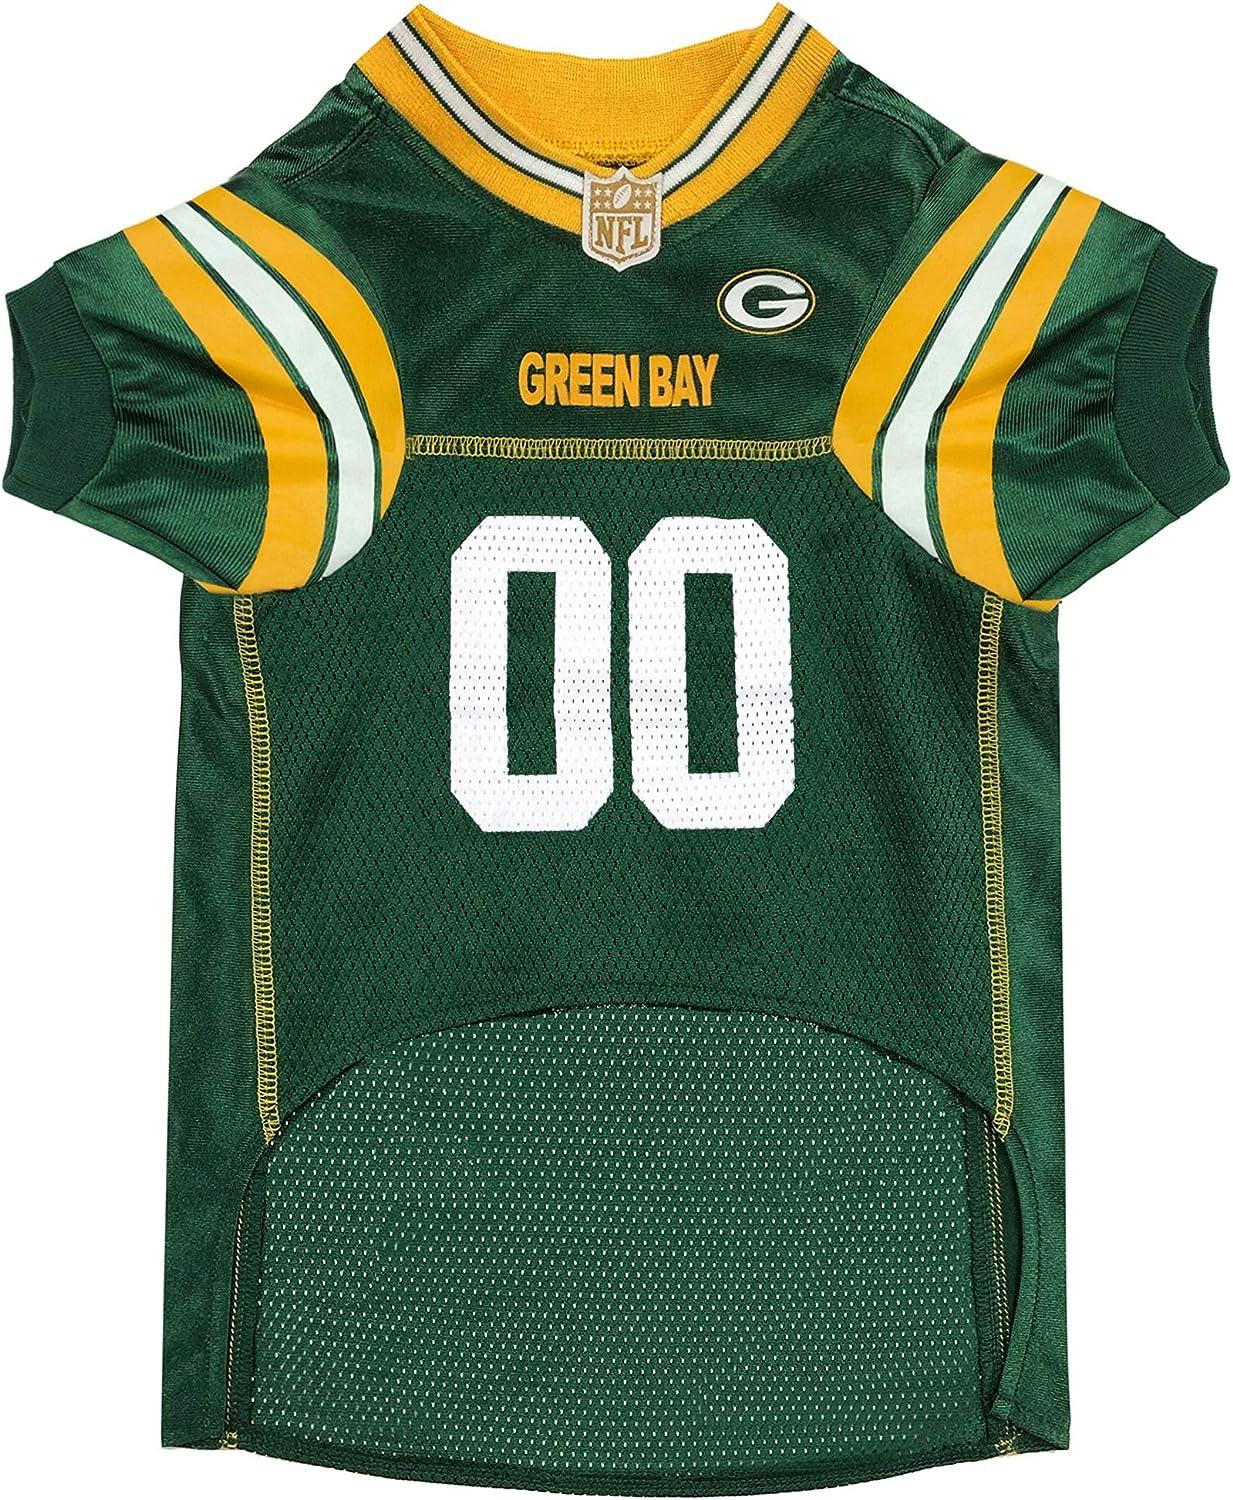  NFL Green Bay Packers Dog Jersey, Size: X-Large. Best Football  Jersey Costume for Dogs & Cats. Licensed Jersey Shirt. : Sports & Outdoors